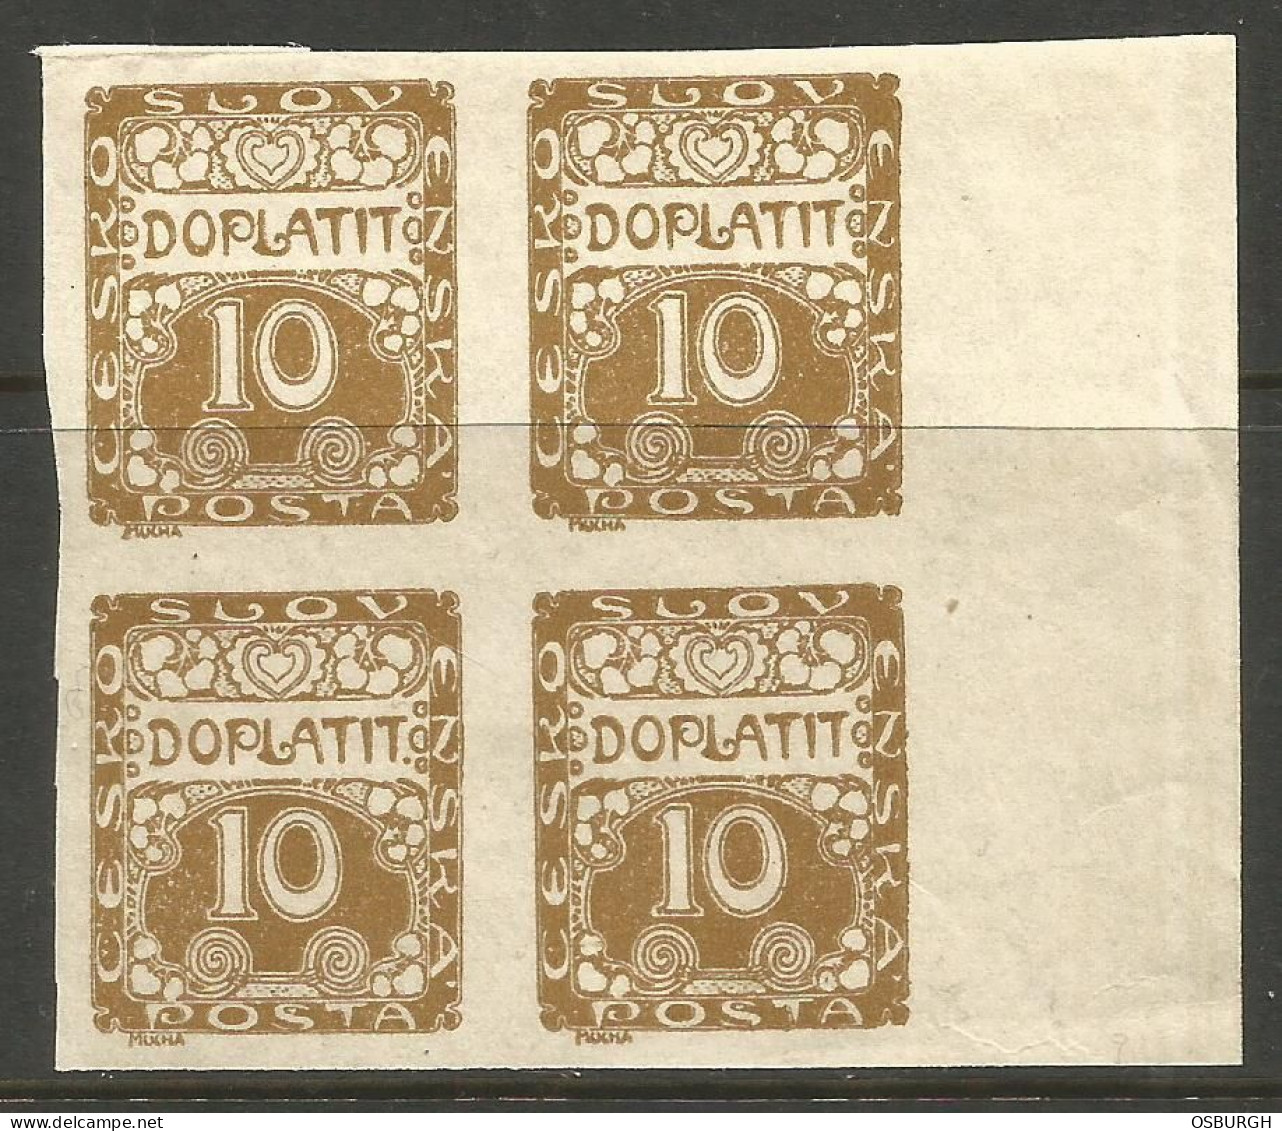 CZECHOSLOVAKIA. 10h IMPERF POSTAGE DUE MARGINAL BLOCK OF FOUR. MOUNTED MINT. - Timbres-taxe